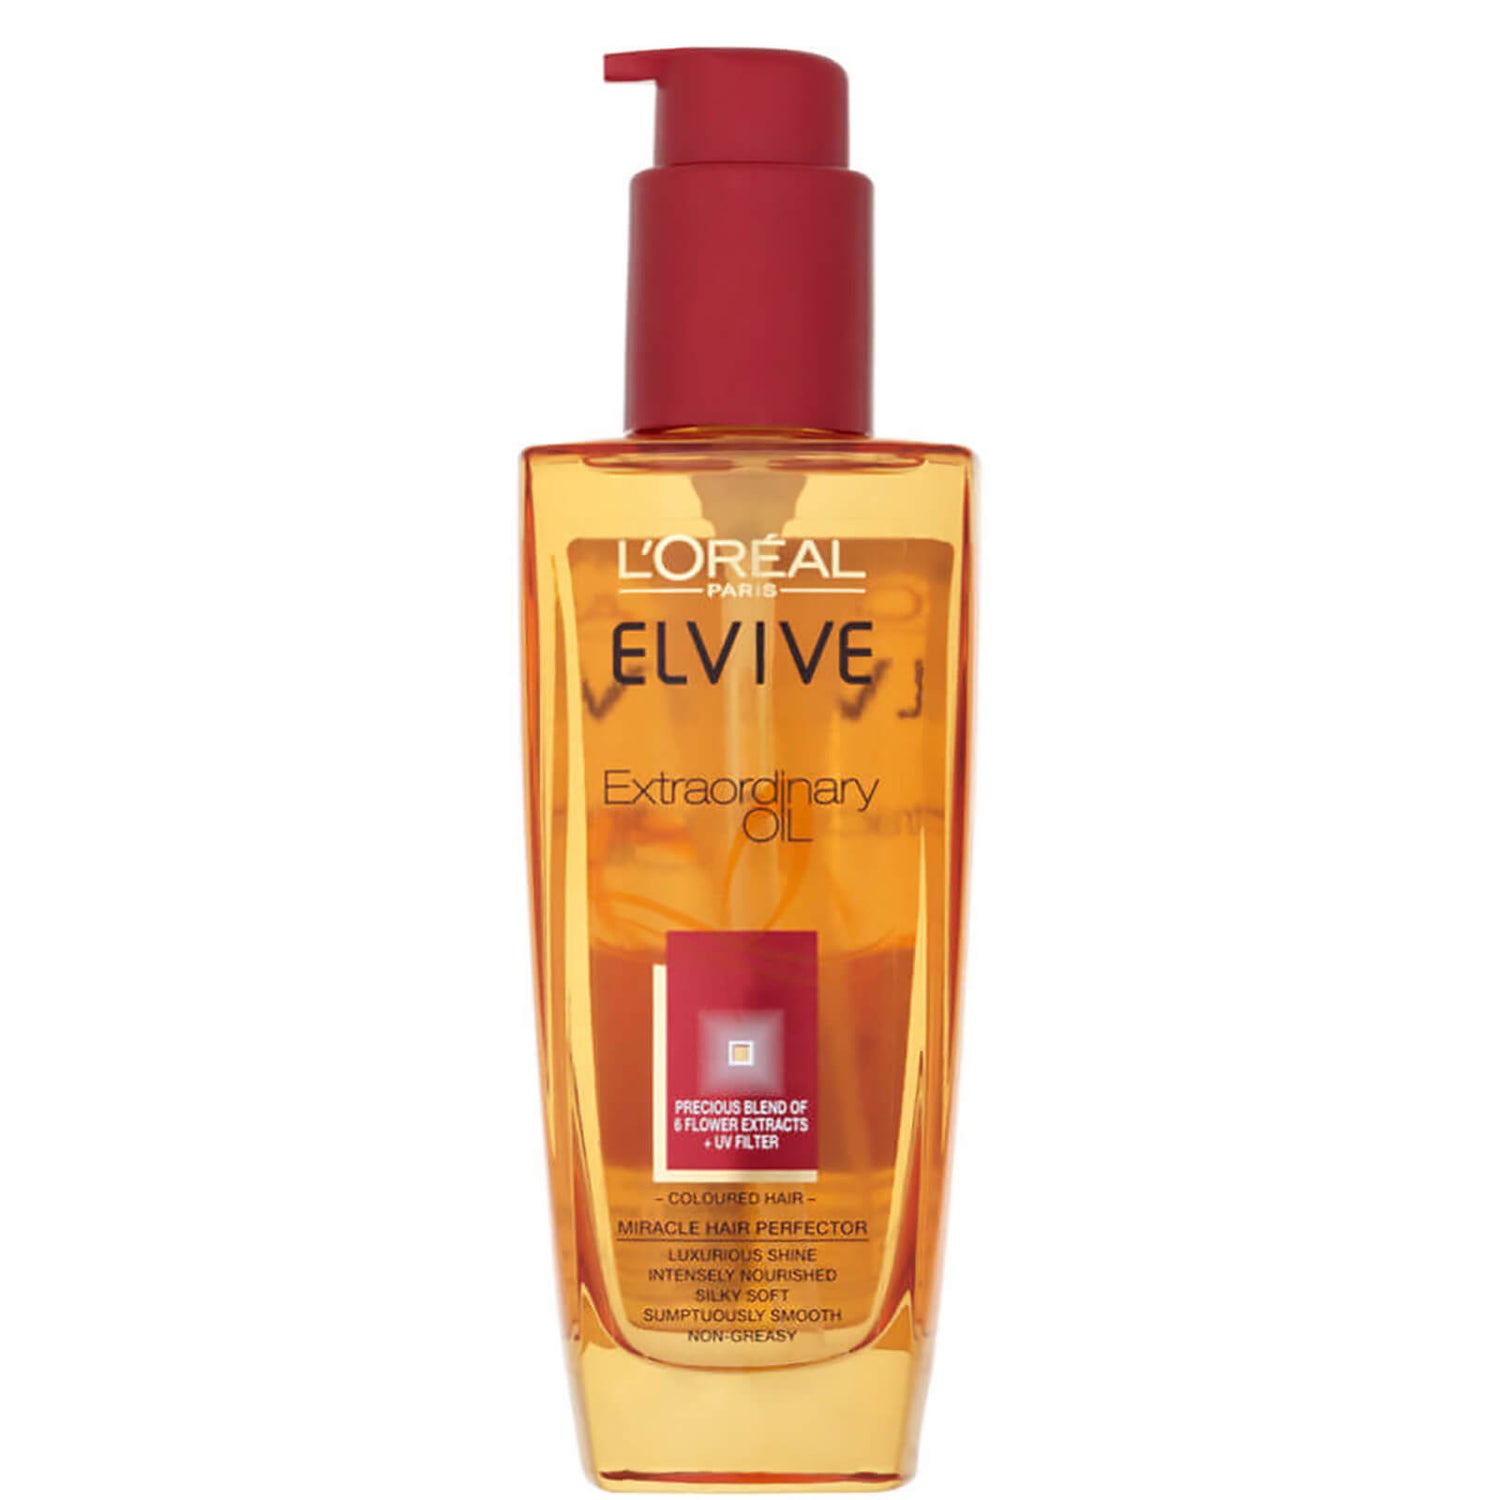 L'Oreal Paris Elvive Extraordinary Oil for Colored Hair